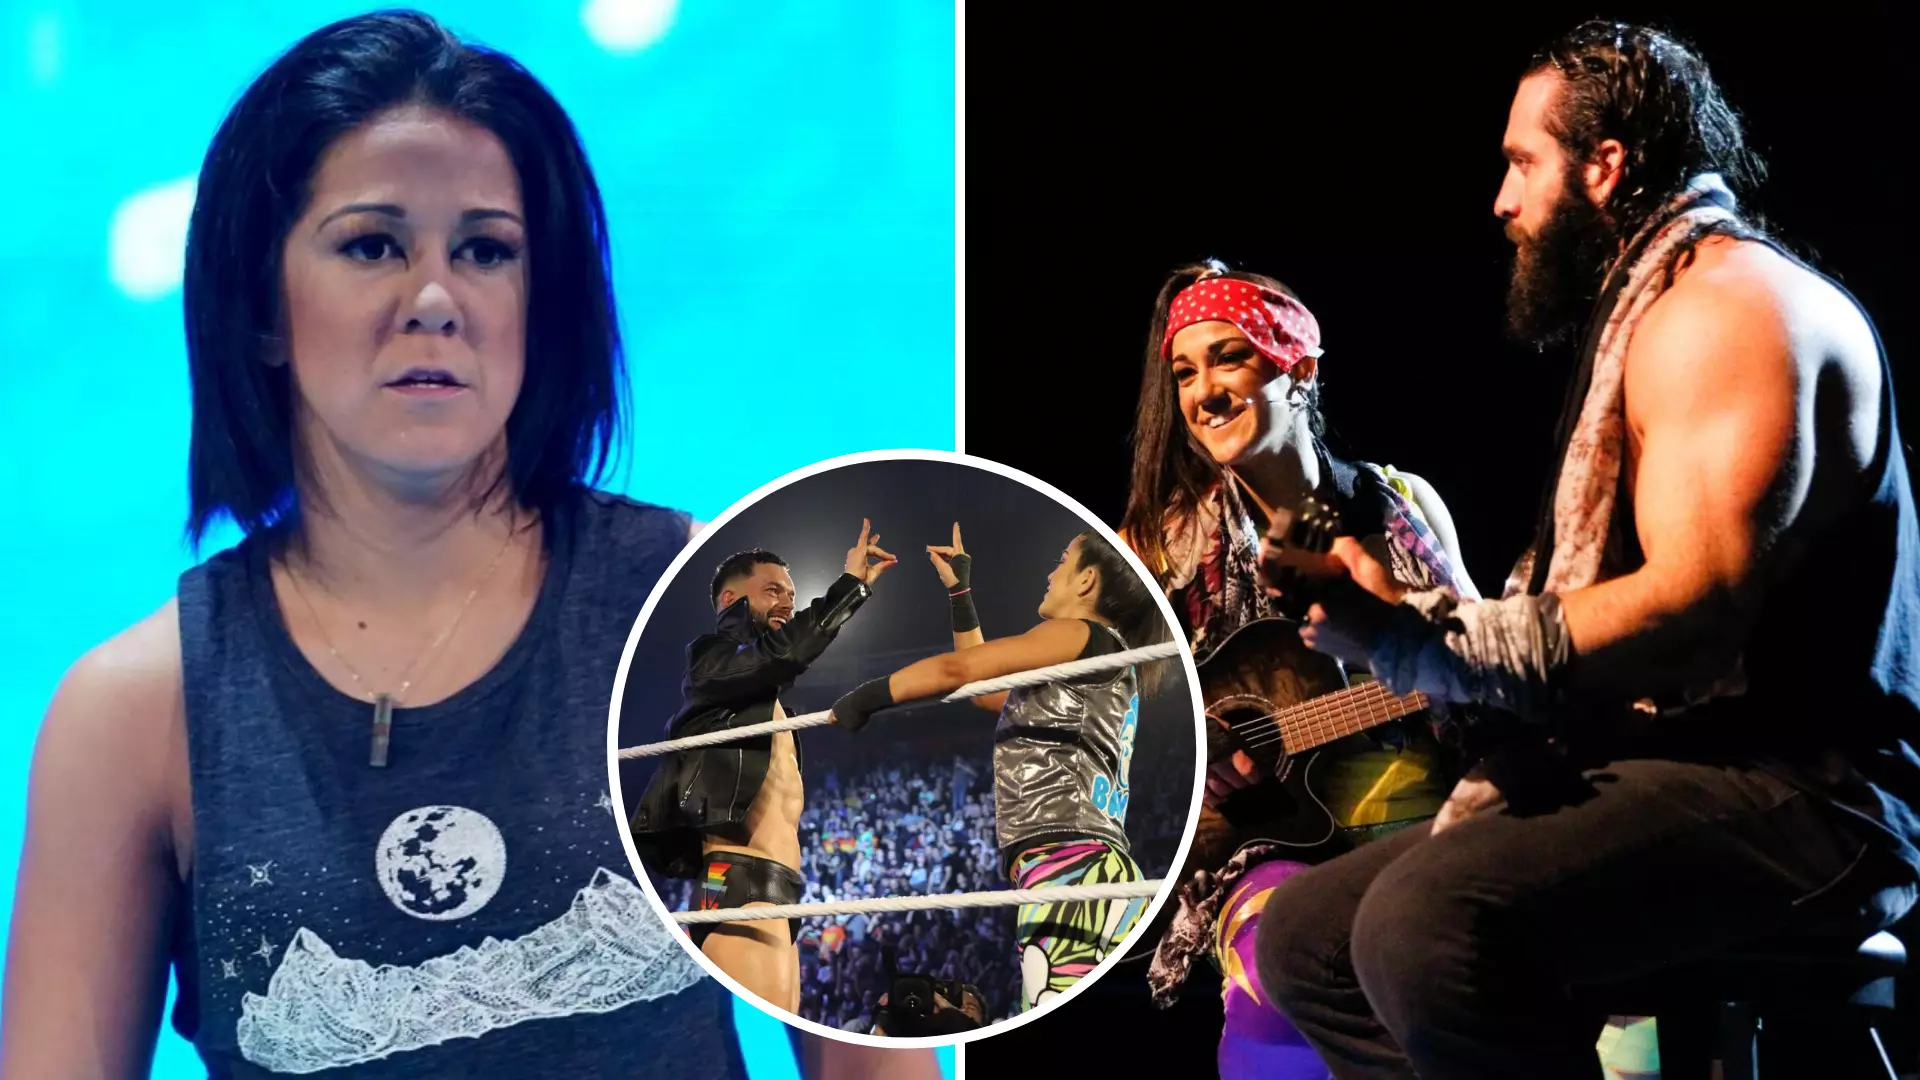 Bayley Would Welcome A New Women’s Championship And More Intergender Wrestling Matches